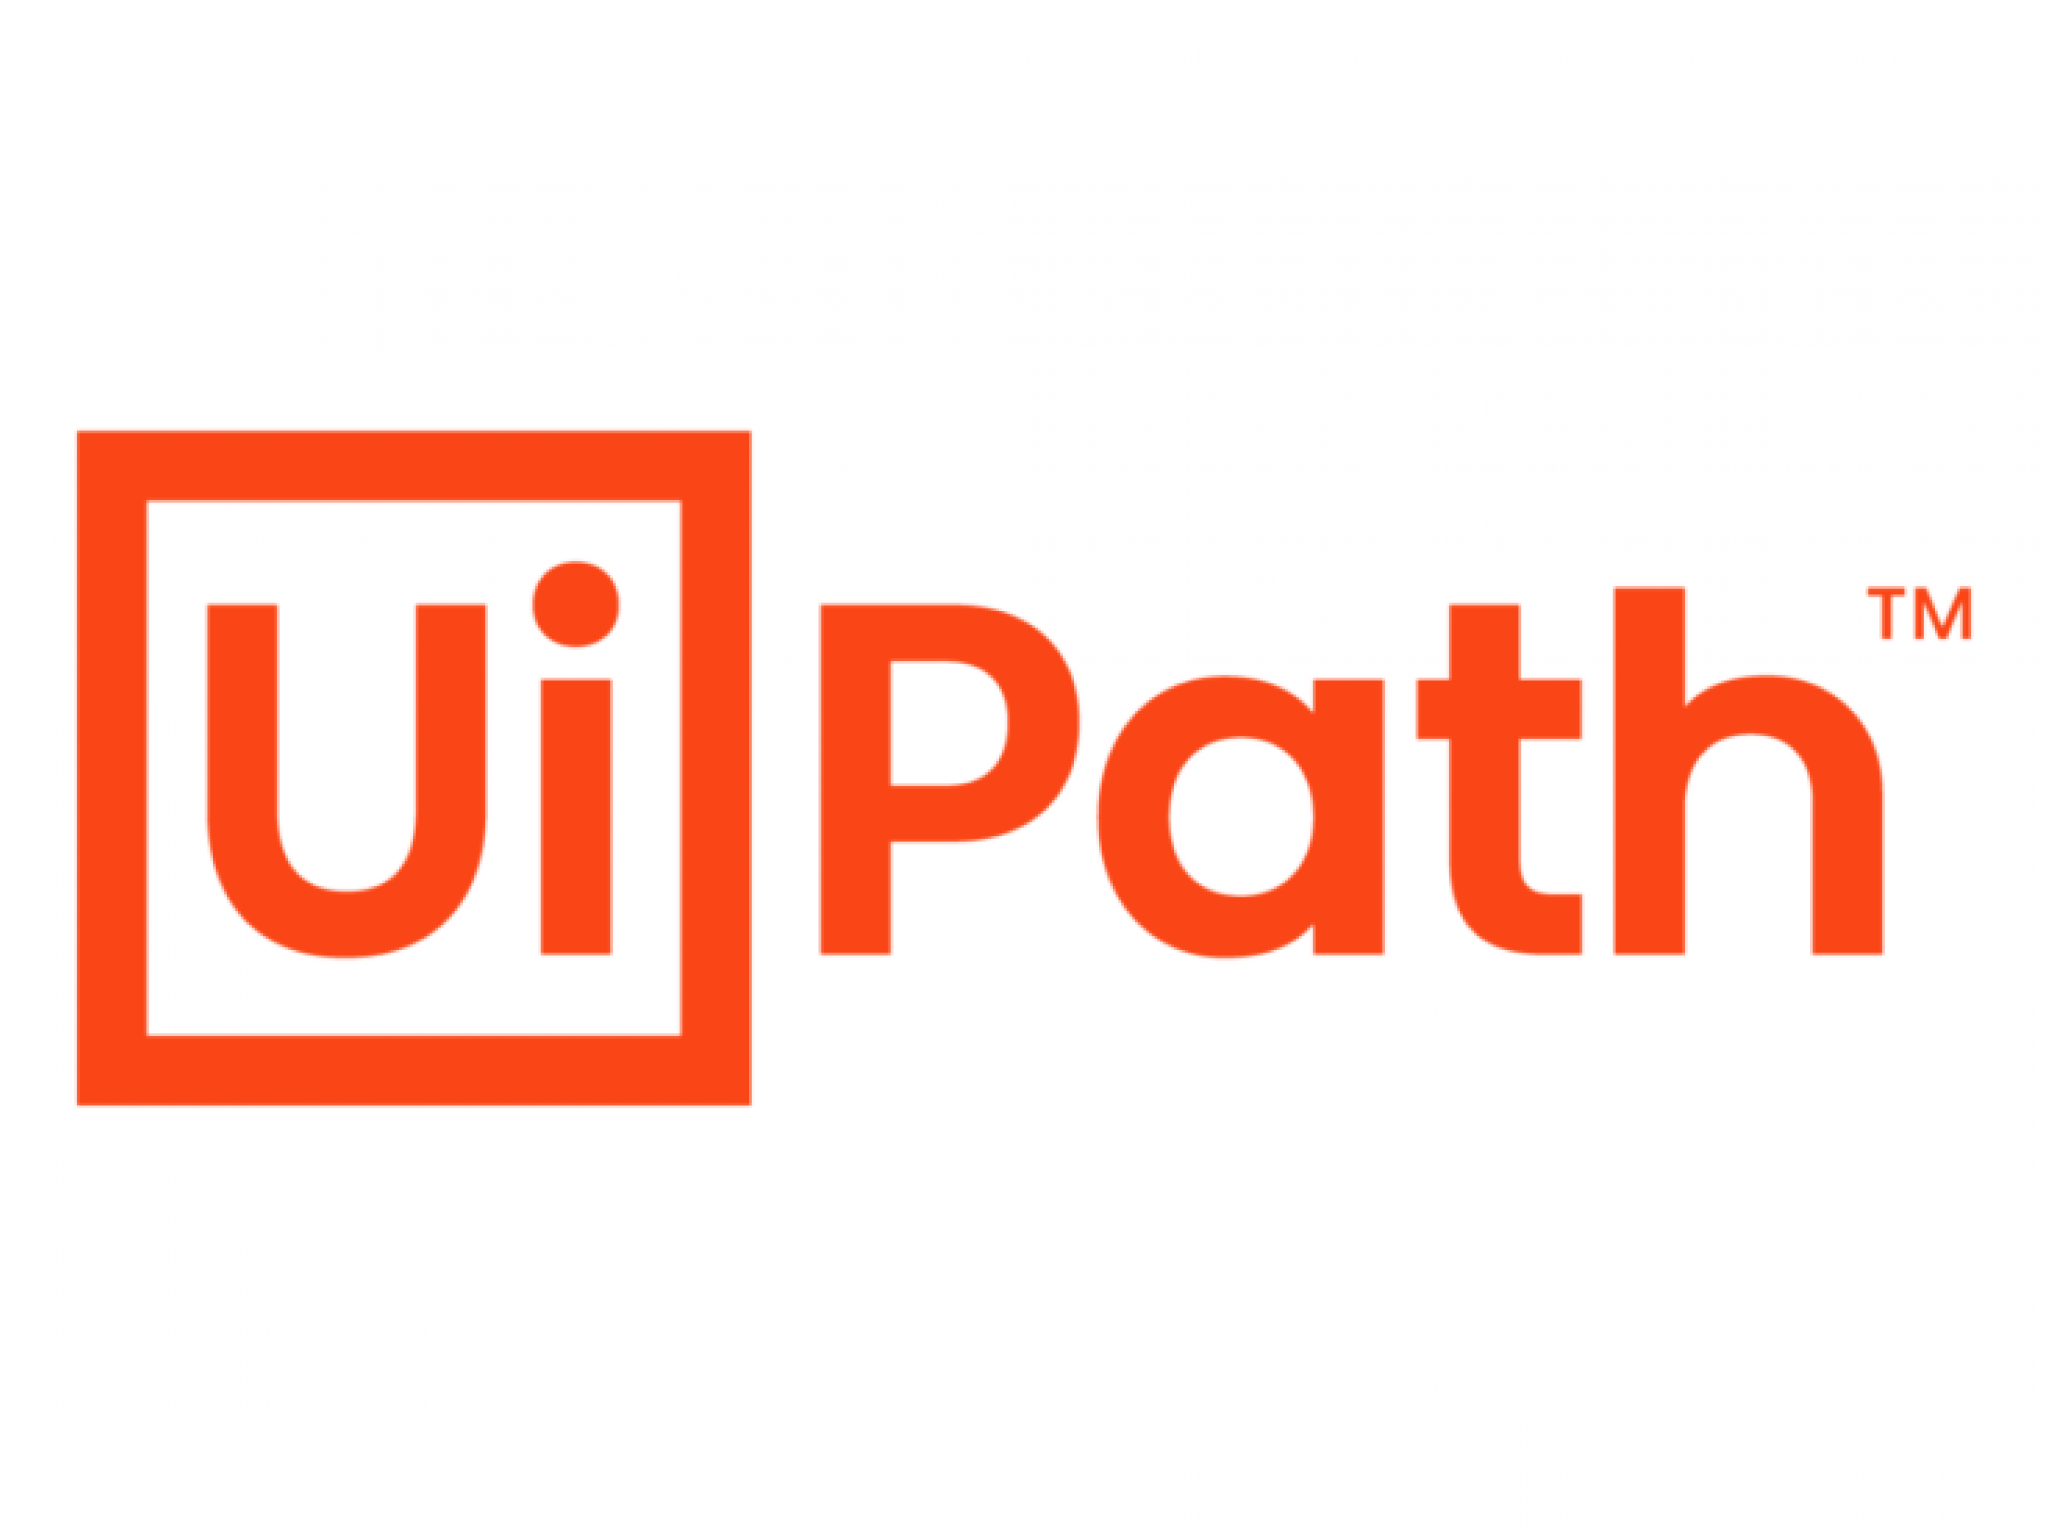  uipath-upgraded-by-jp-morgan-on-hope-of-stable-arr-growth-several-other-analysts-bump-up-forecasts 